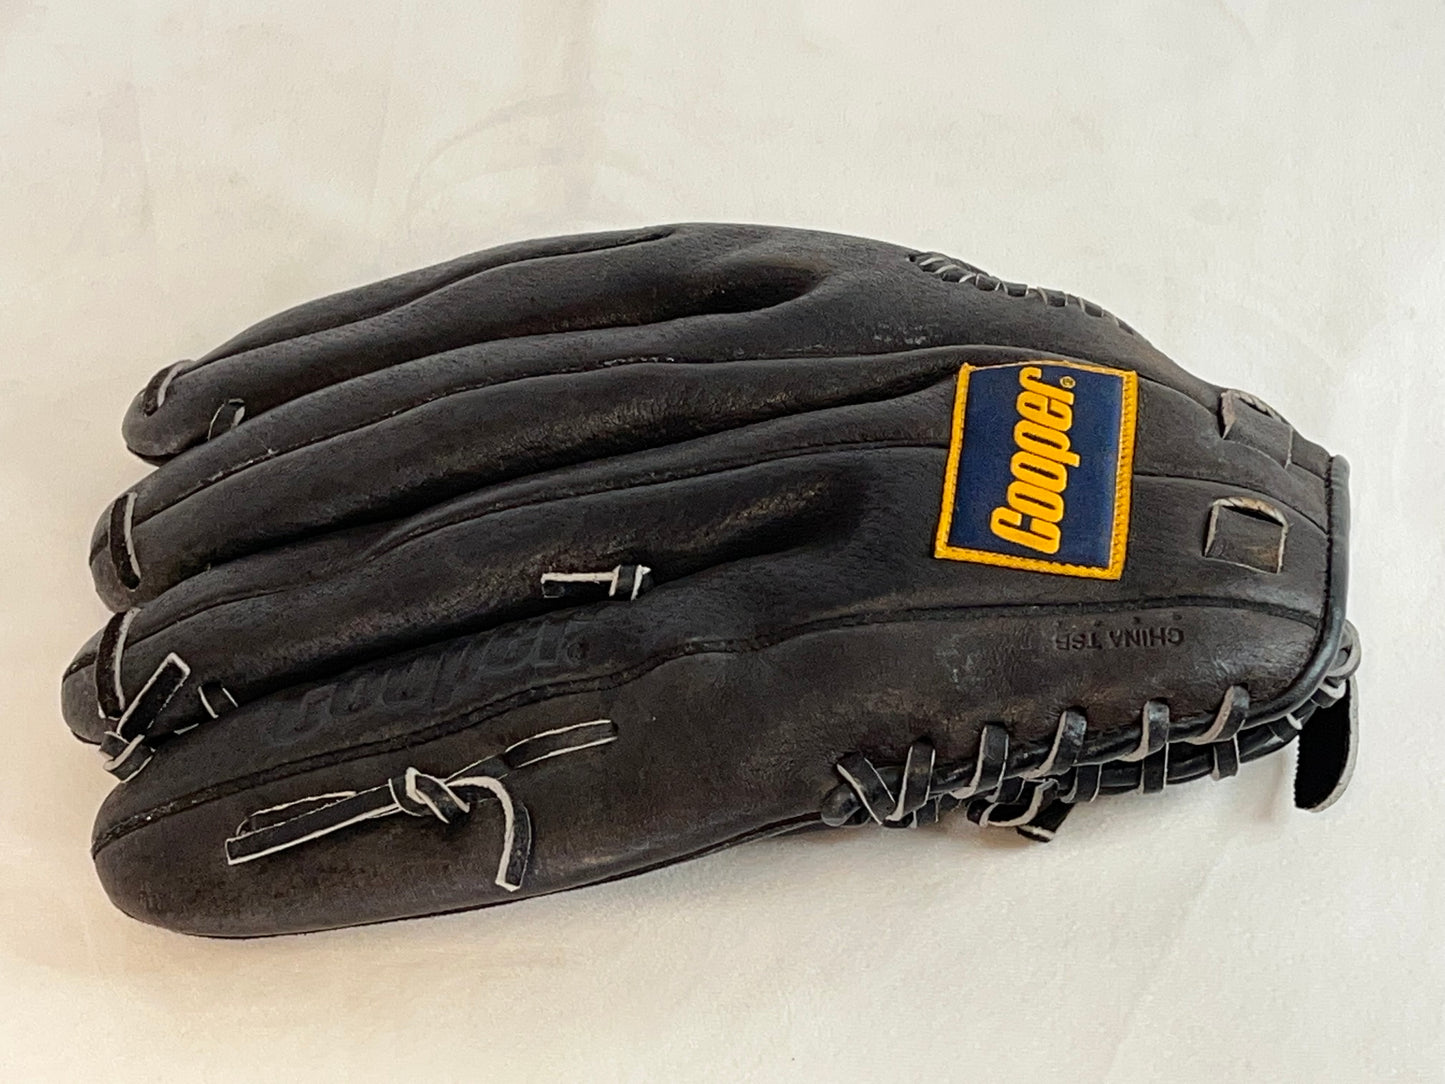 Baseball Glove Adult Size 13 inch Cooper Black Leather Fits On Left Hand As New Excellent Quality